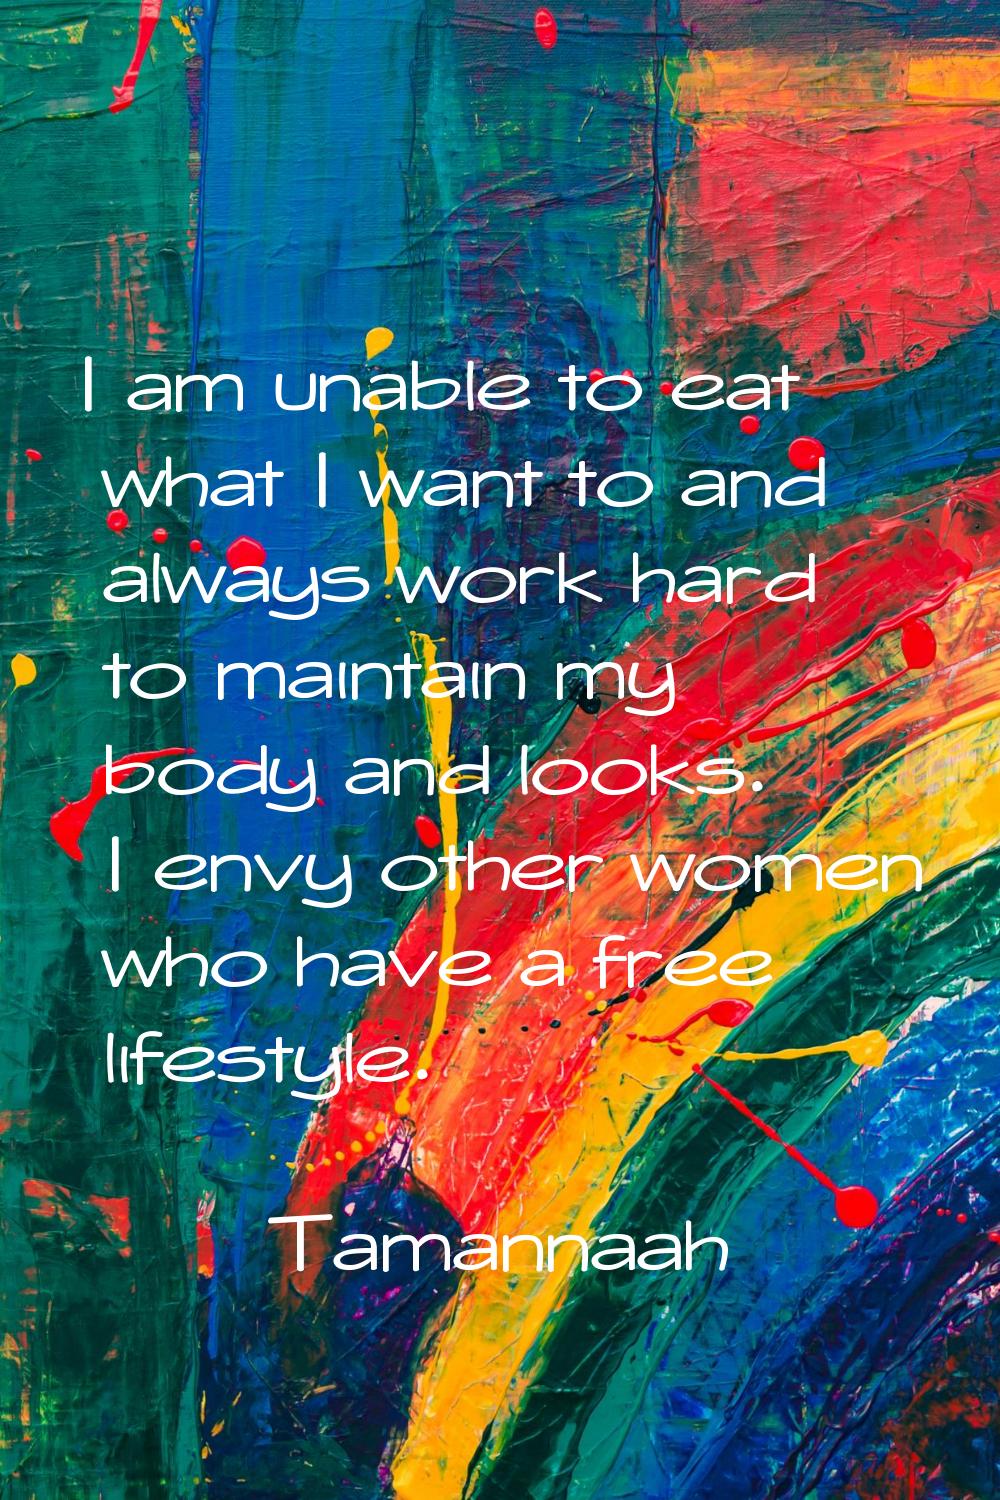 I am unable to eat what I want to and always work hard to maintain my body and looks. I envy other 